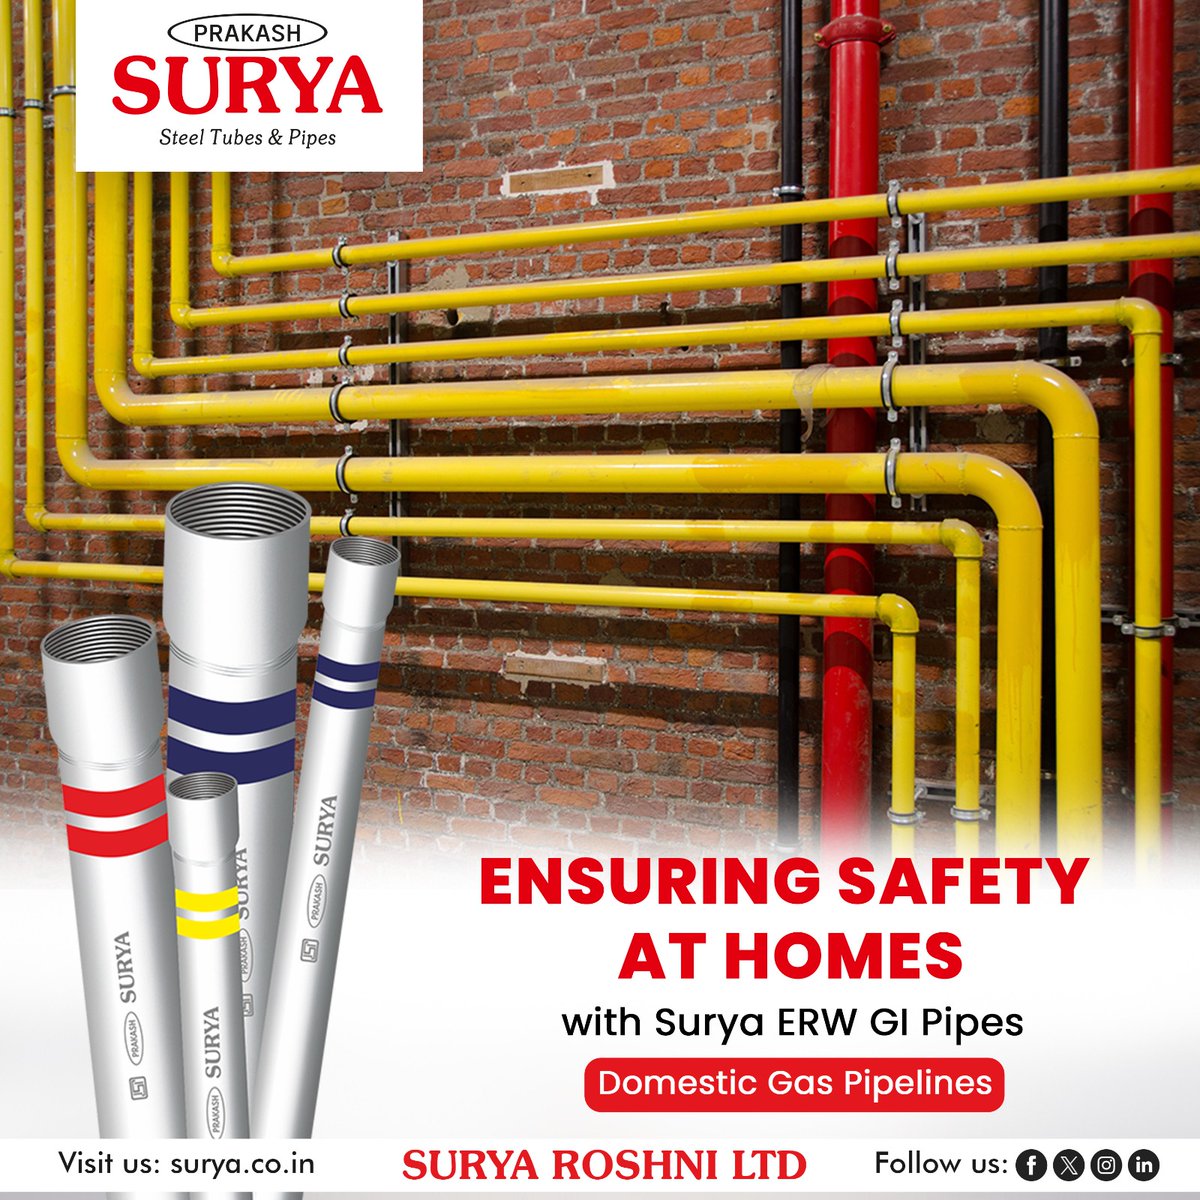 Protecting your home starts from the ground up. With Surya ERW GI Pipes, ensure the safety and stability of your haven. 

#sueya #suryapipes #safety #HomeSafety #SuryaGI #ProtectYourHome